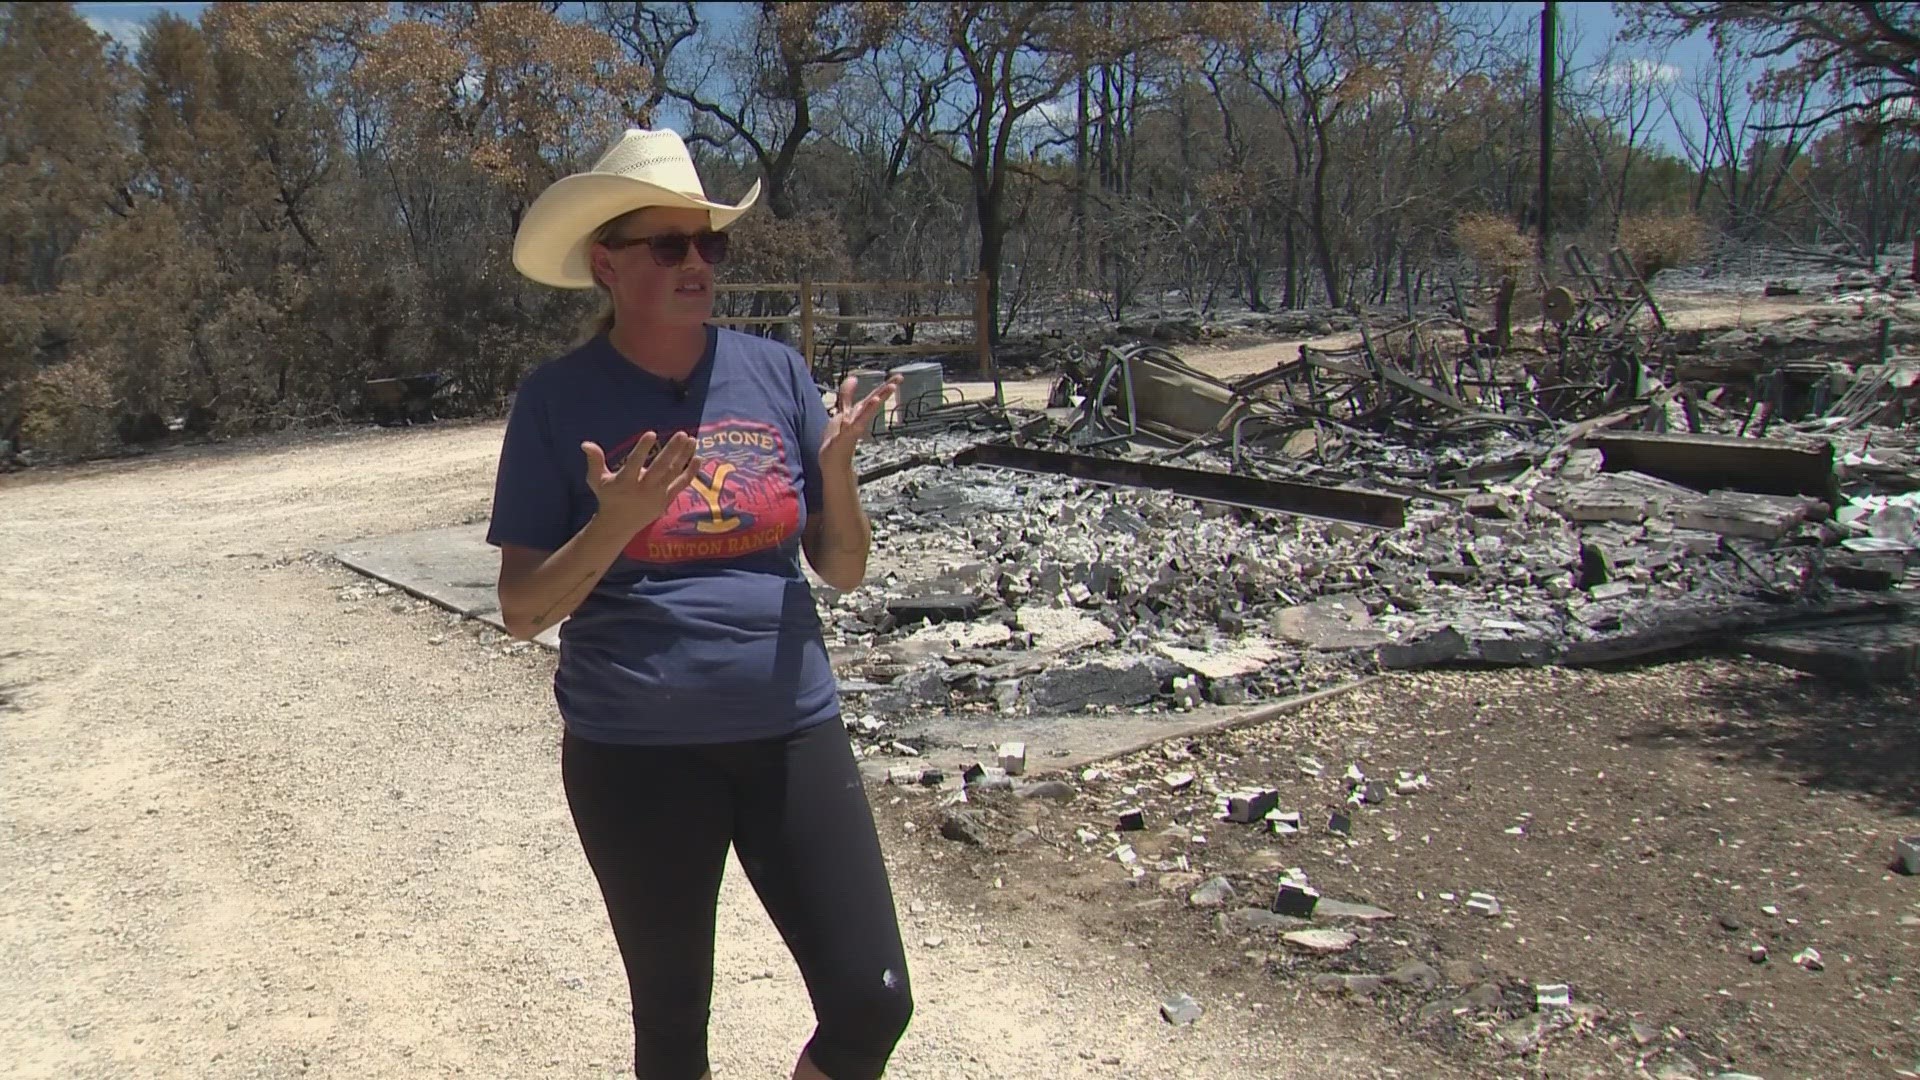 One San Marcos woman is starting a long journey of rebuilding after the Oak Grove wildfire, which burned 365 acres in Hays County.